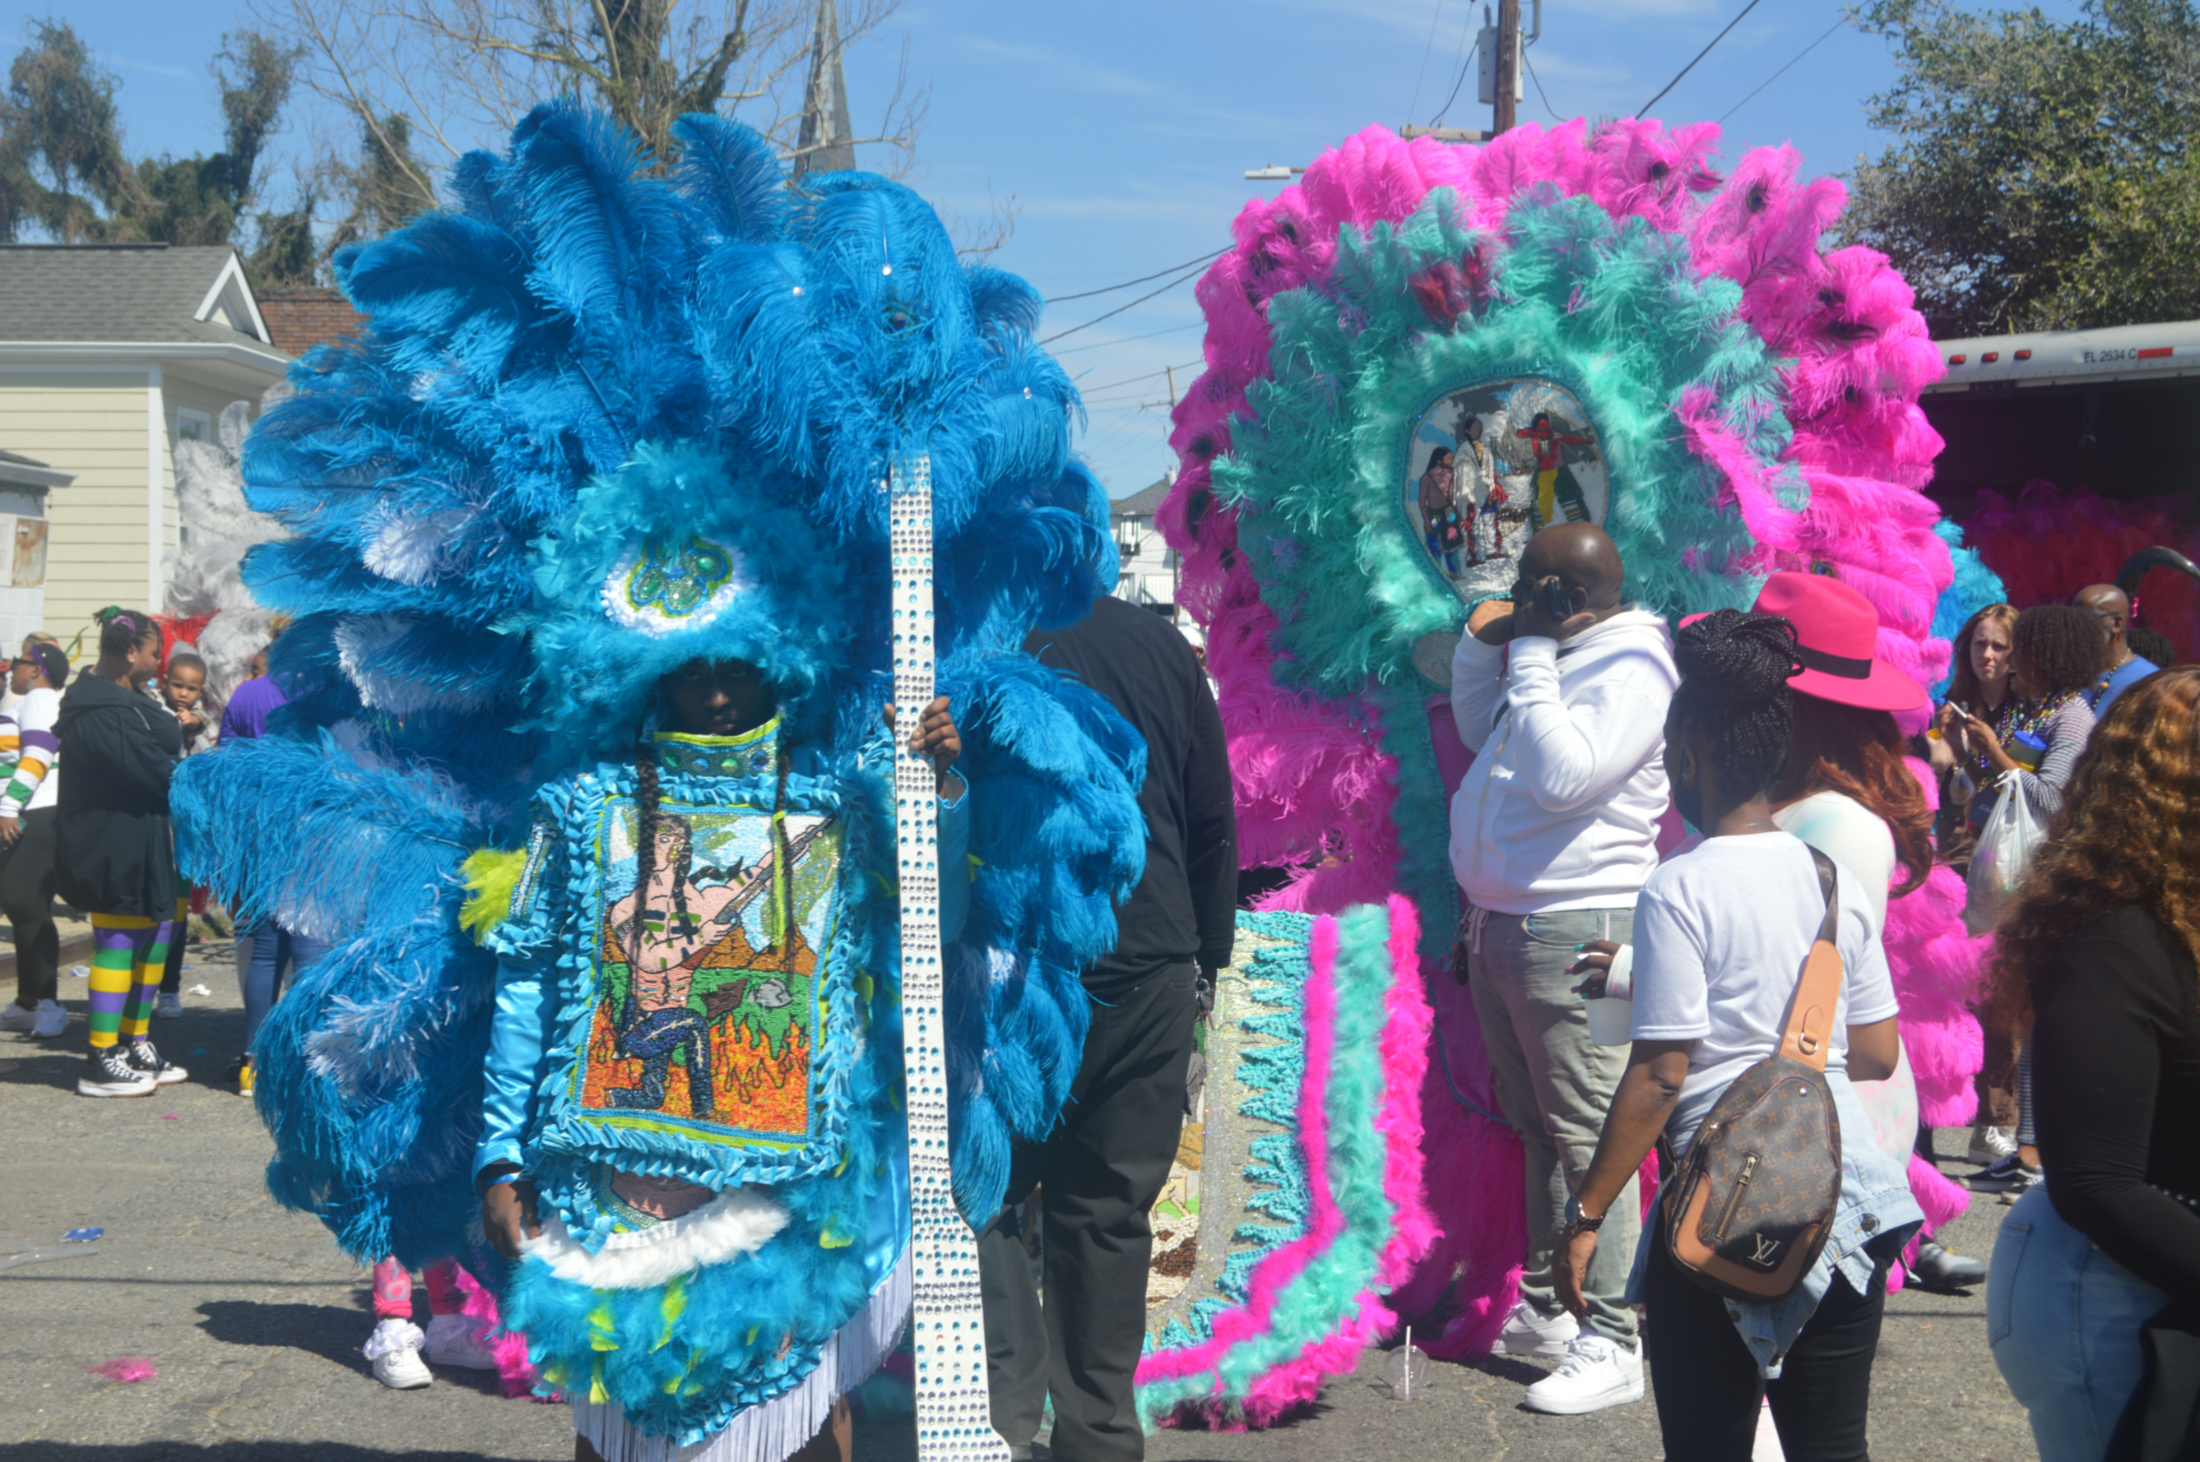 “We Had Some Fun On The Holiday”: Mardi Gras on the Backstreets of New Orleans